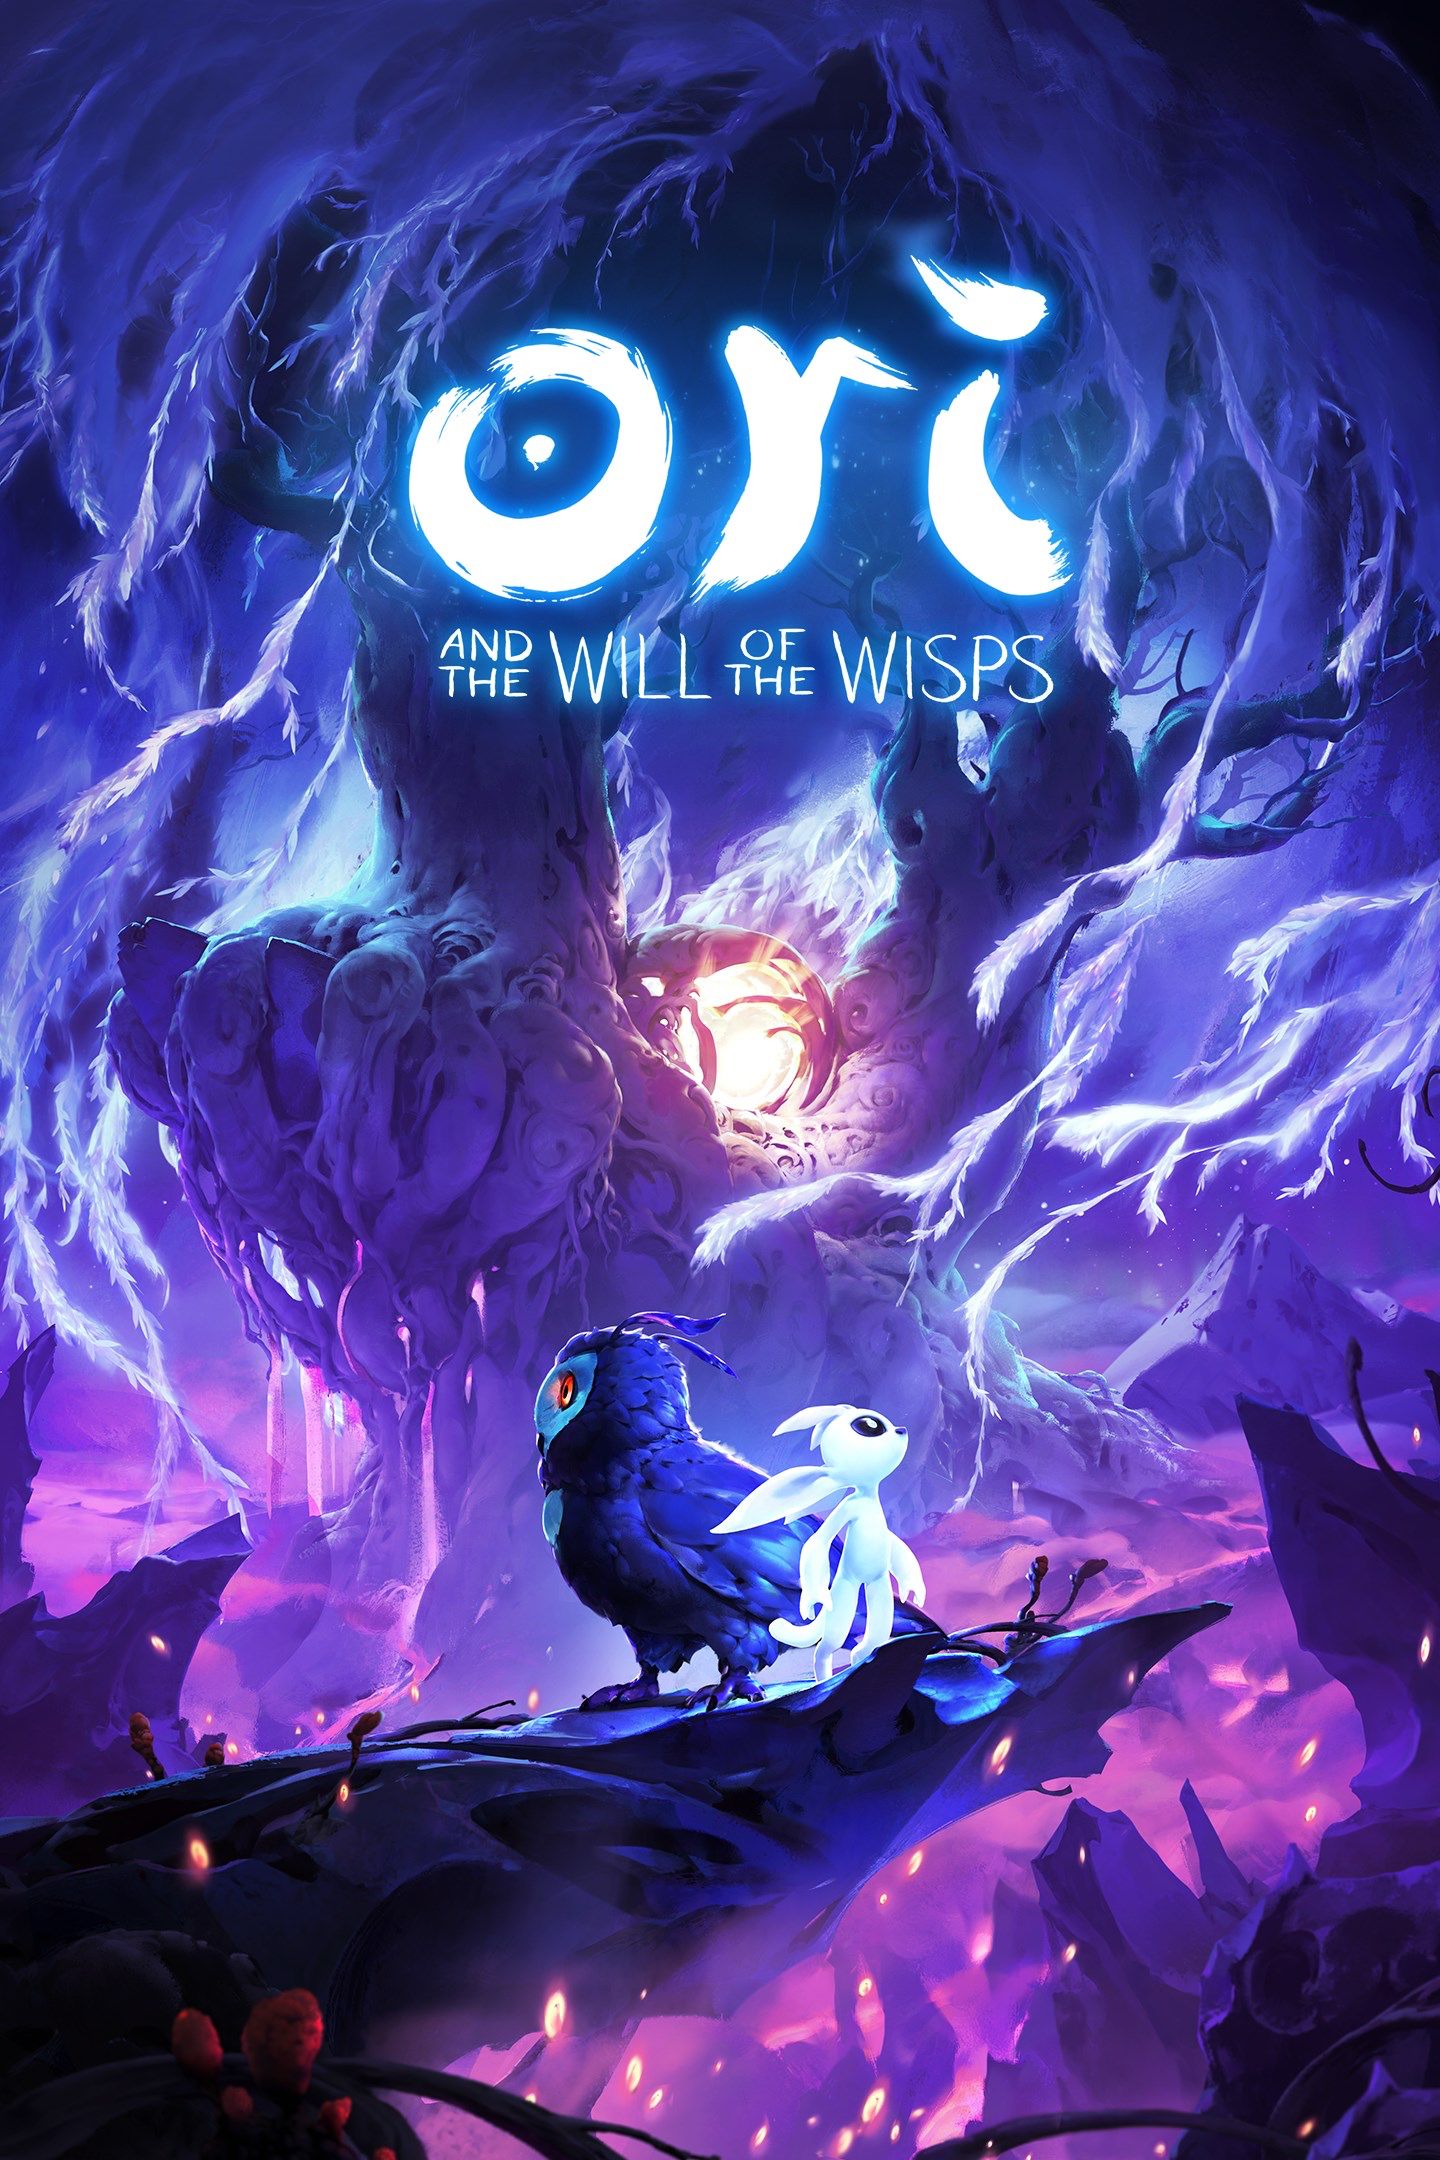 Ubisoft is reportedly making a new Prince of Persia game 'inspired by Ori